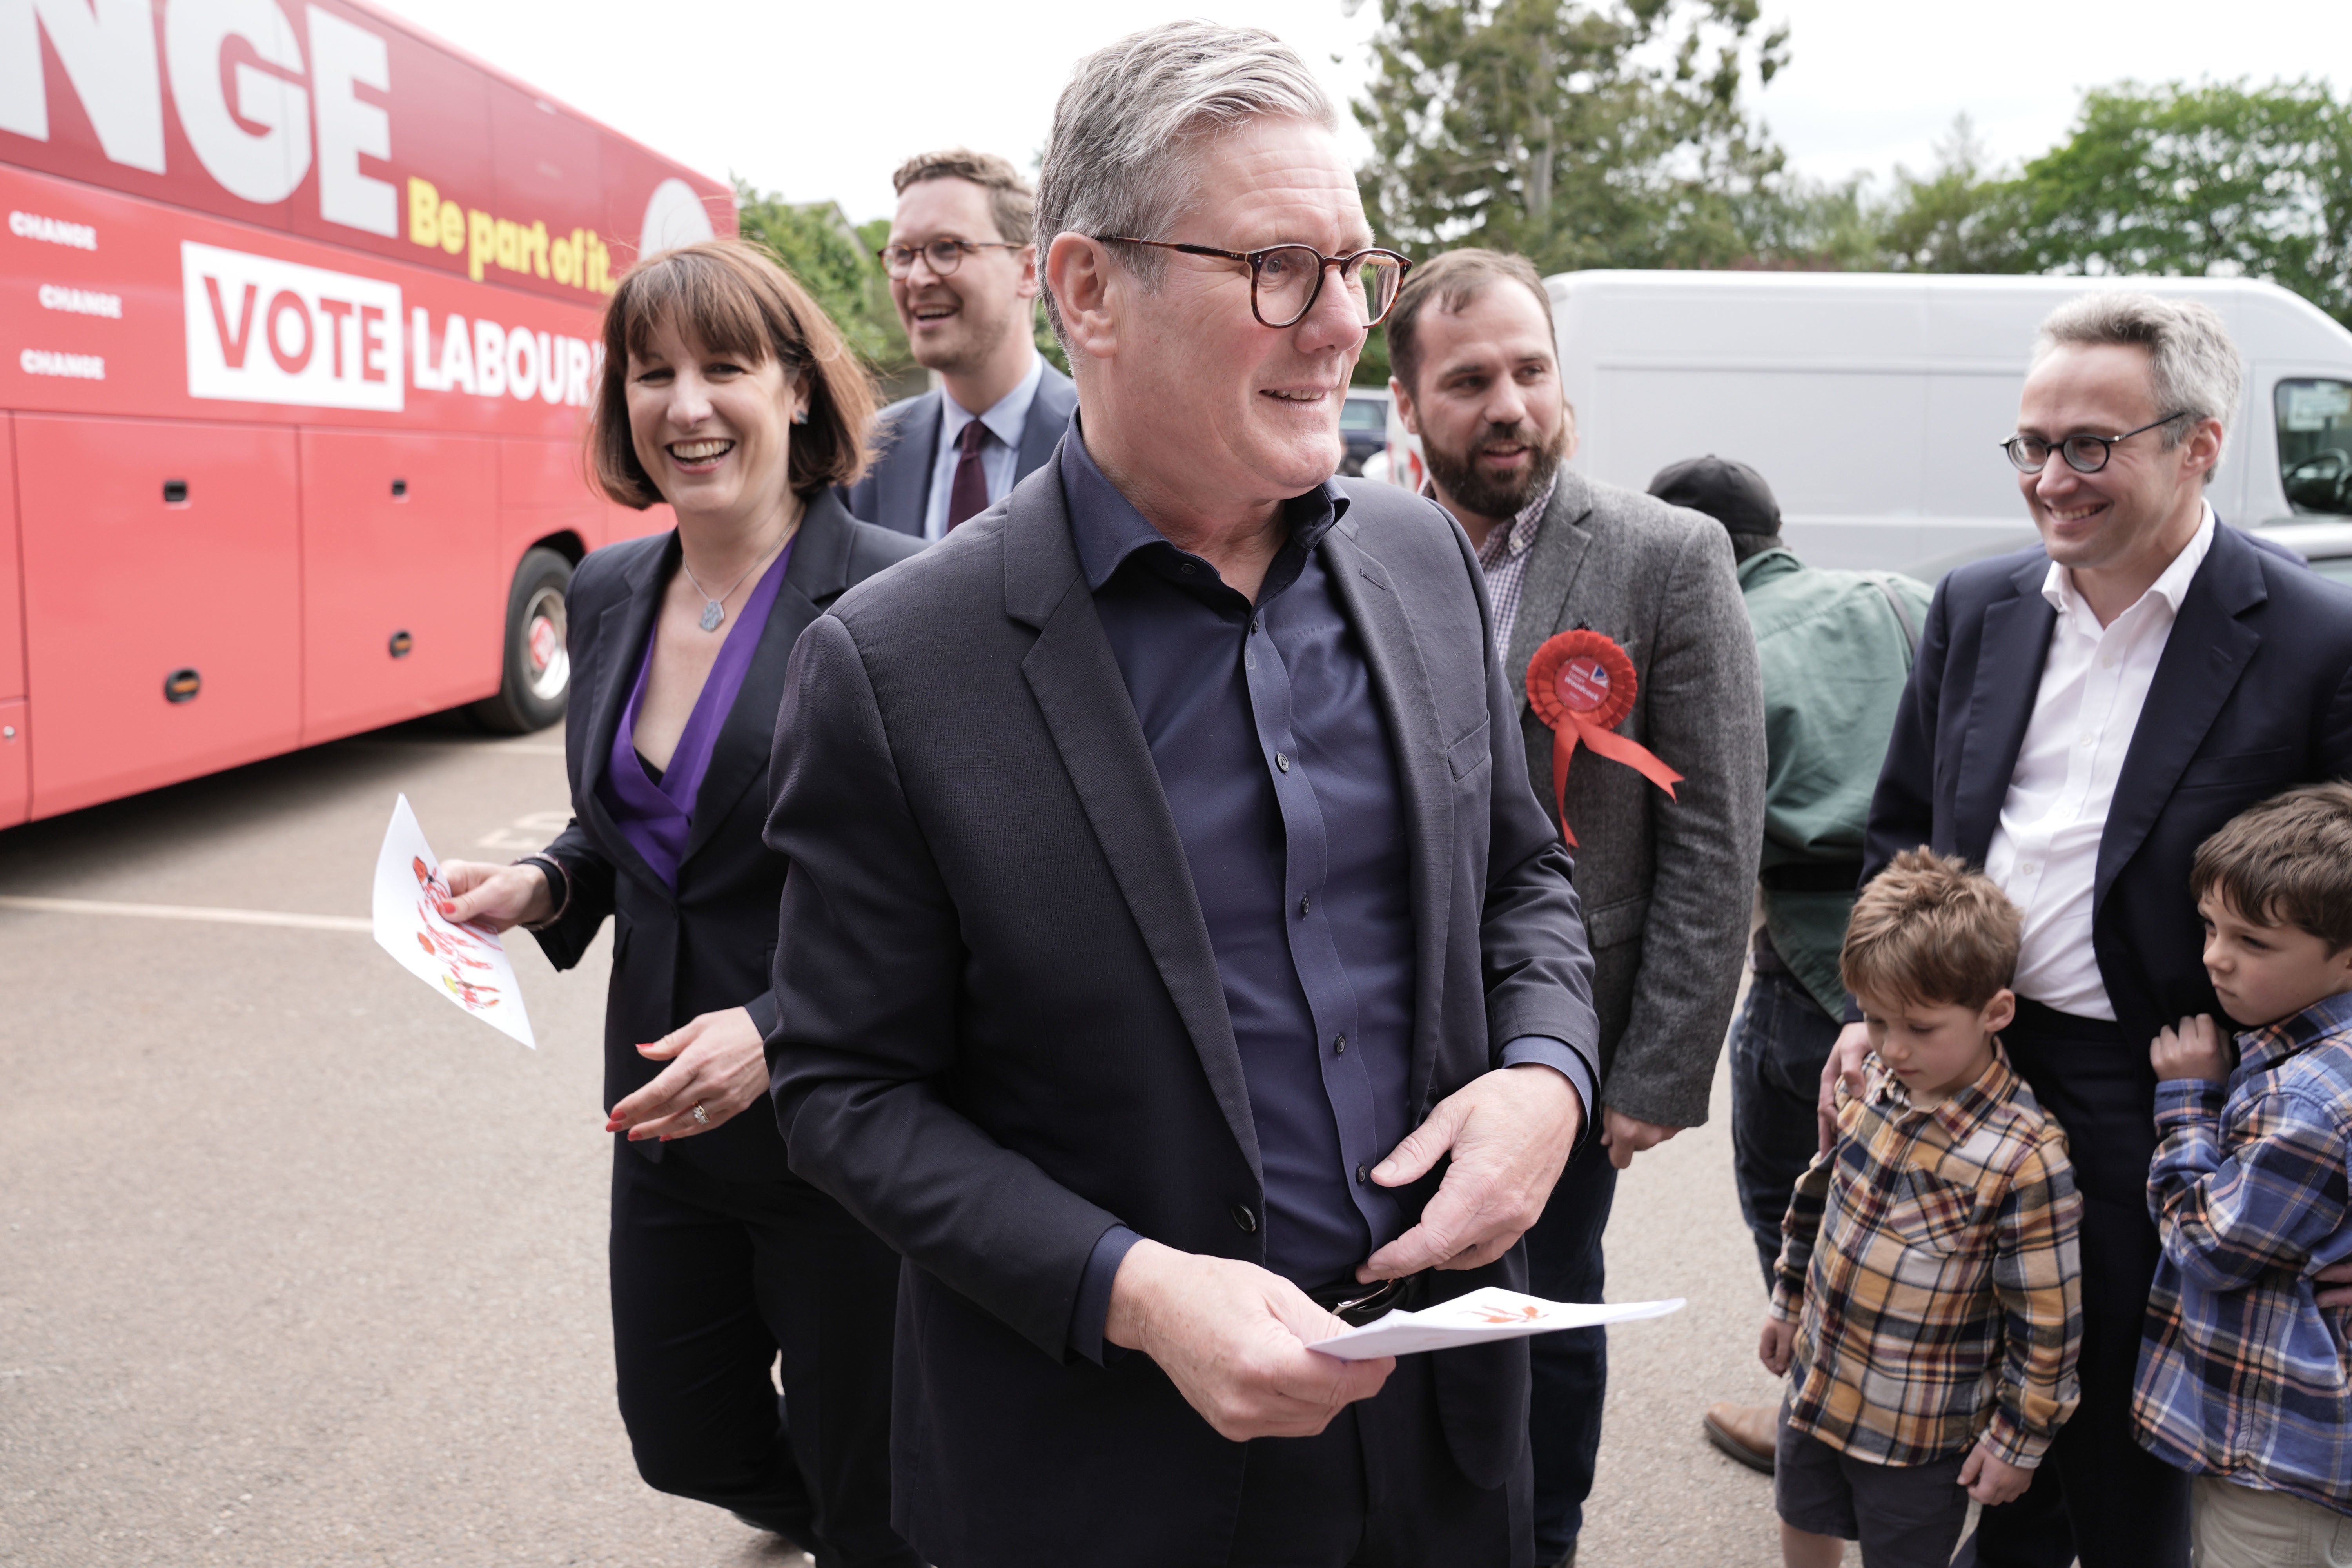 Labour leader Sir Keir Starmer and shadow chancellor Rachel Reeves on the campaign trail (Stefan Rousseau/PA)